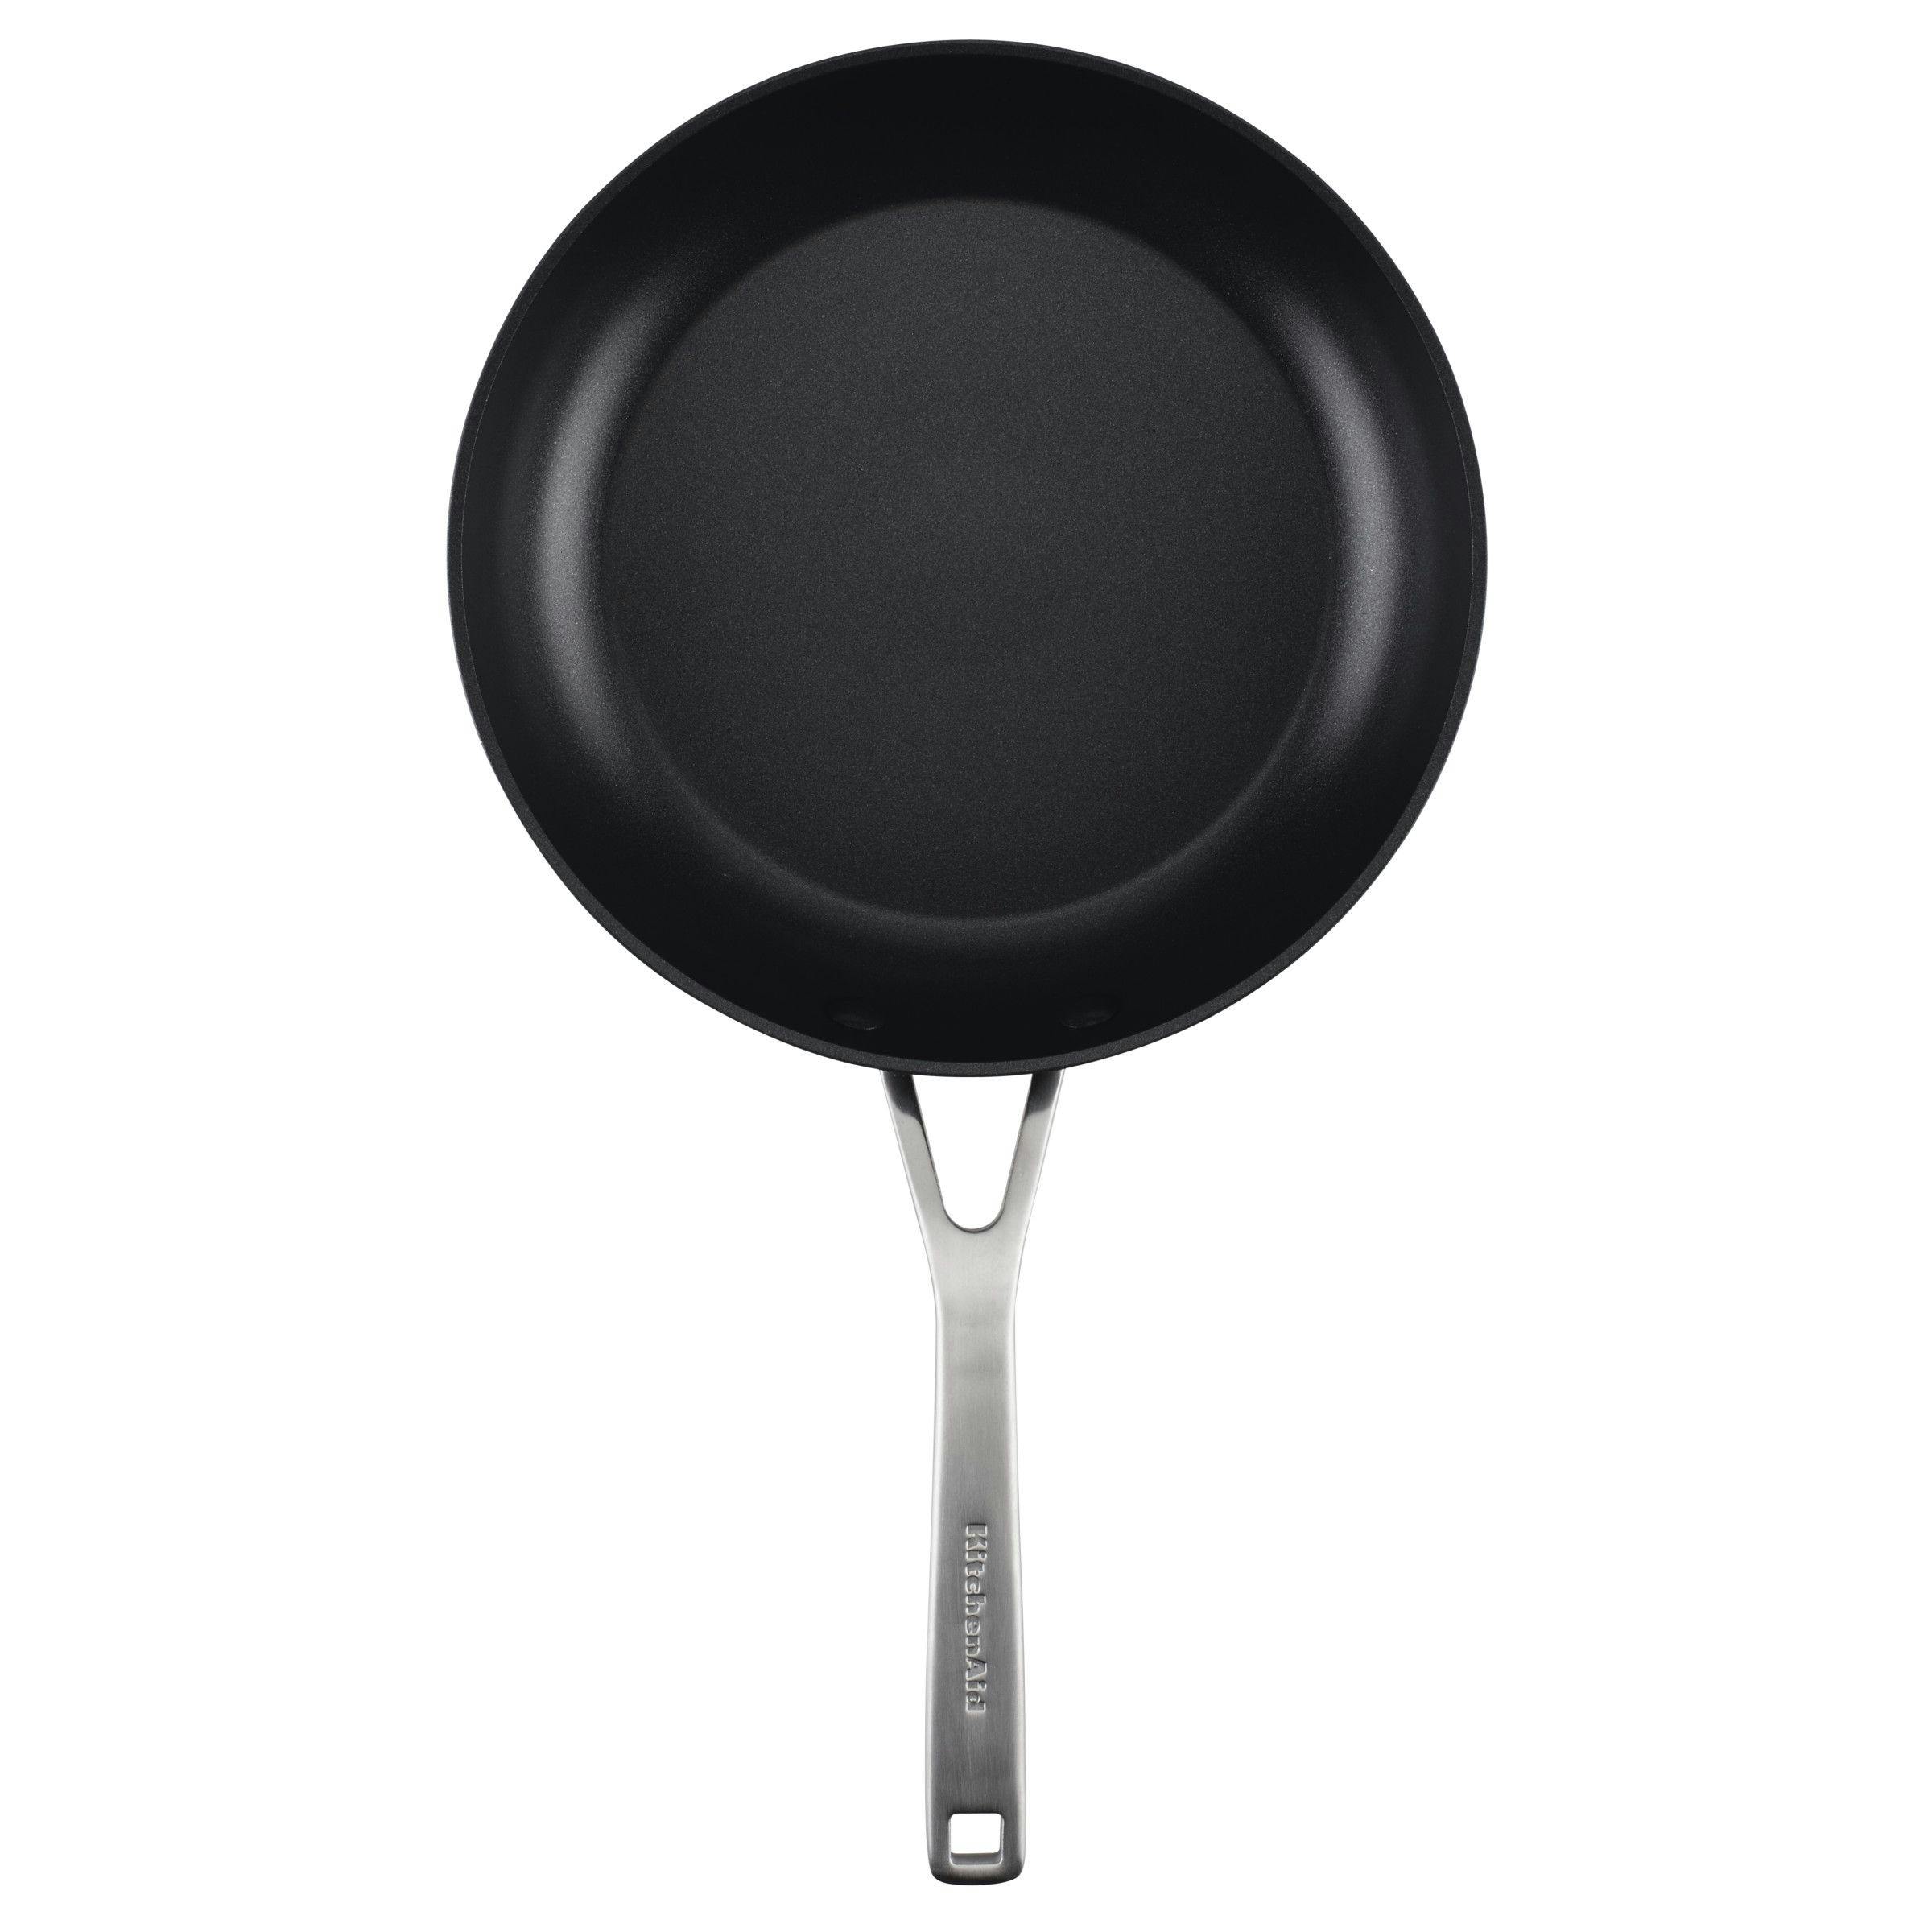 KitchenAid Hard Anodized Induction Frying Pan with Lid, 10-Inch, Matte Black